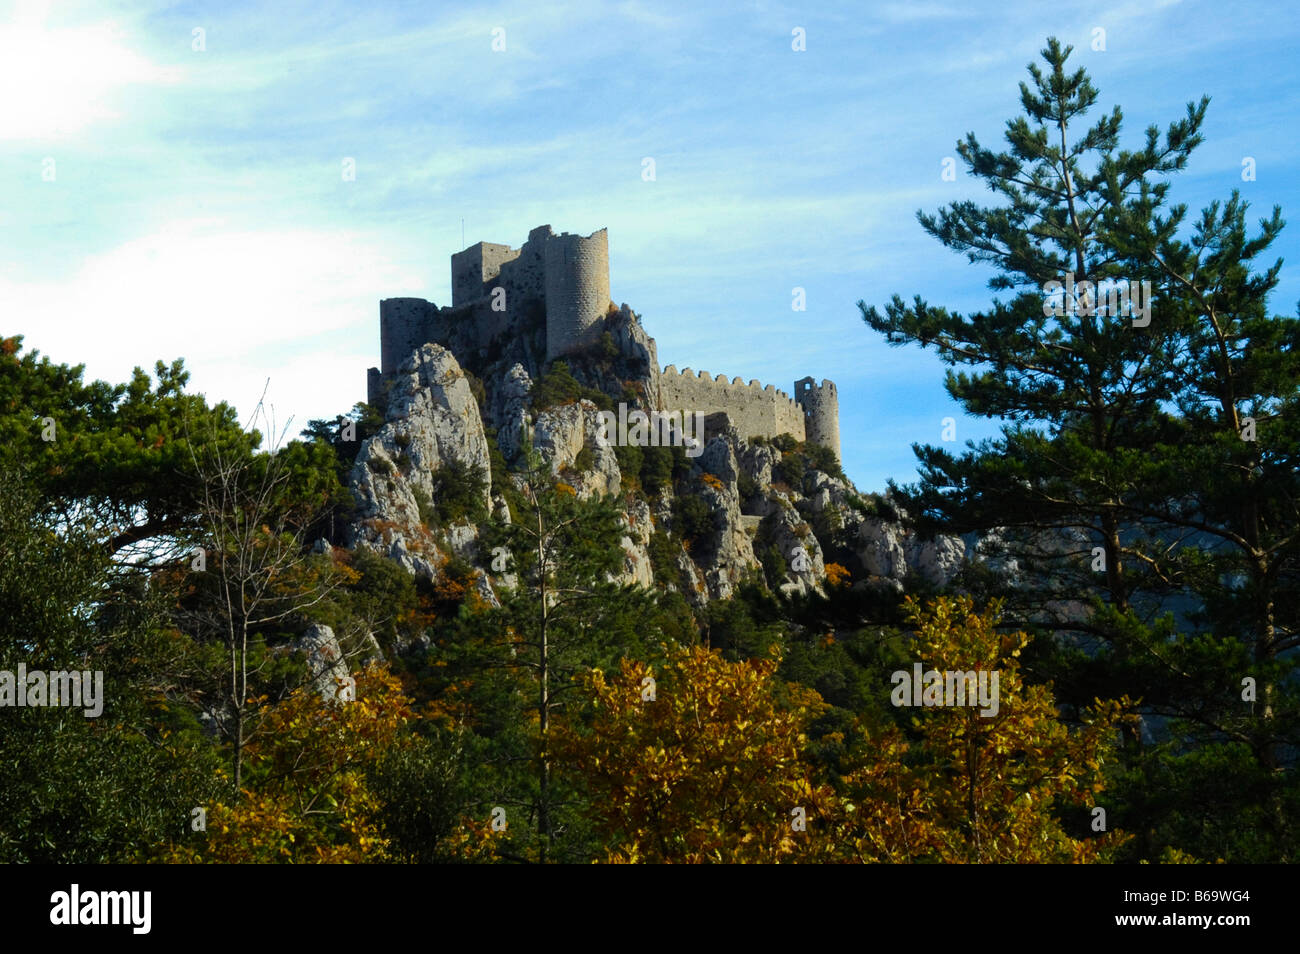 french, hilltop, castle, fortress, fortresses, france, castles, chateau, chateaus, chateux, chateuxs, battlement, battlements, Stock Photo